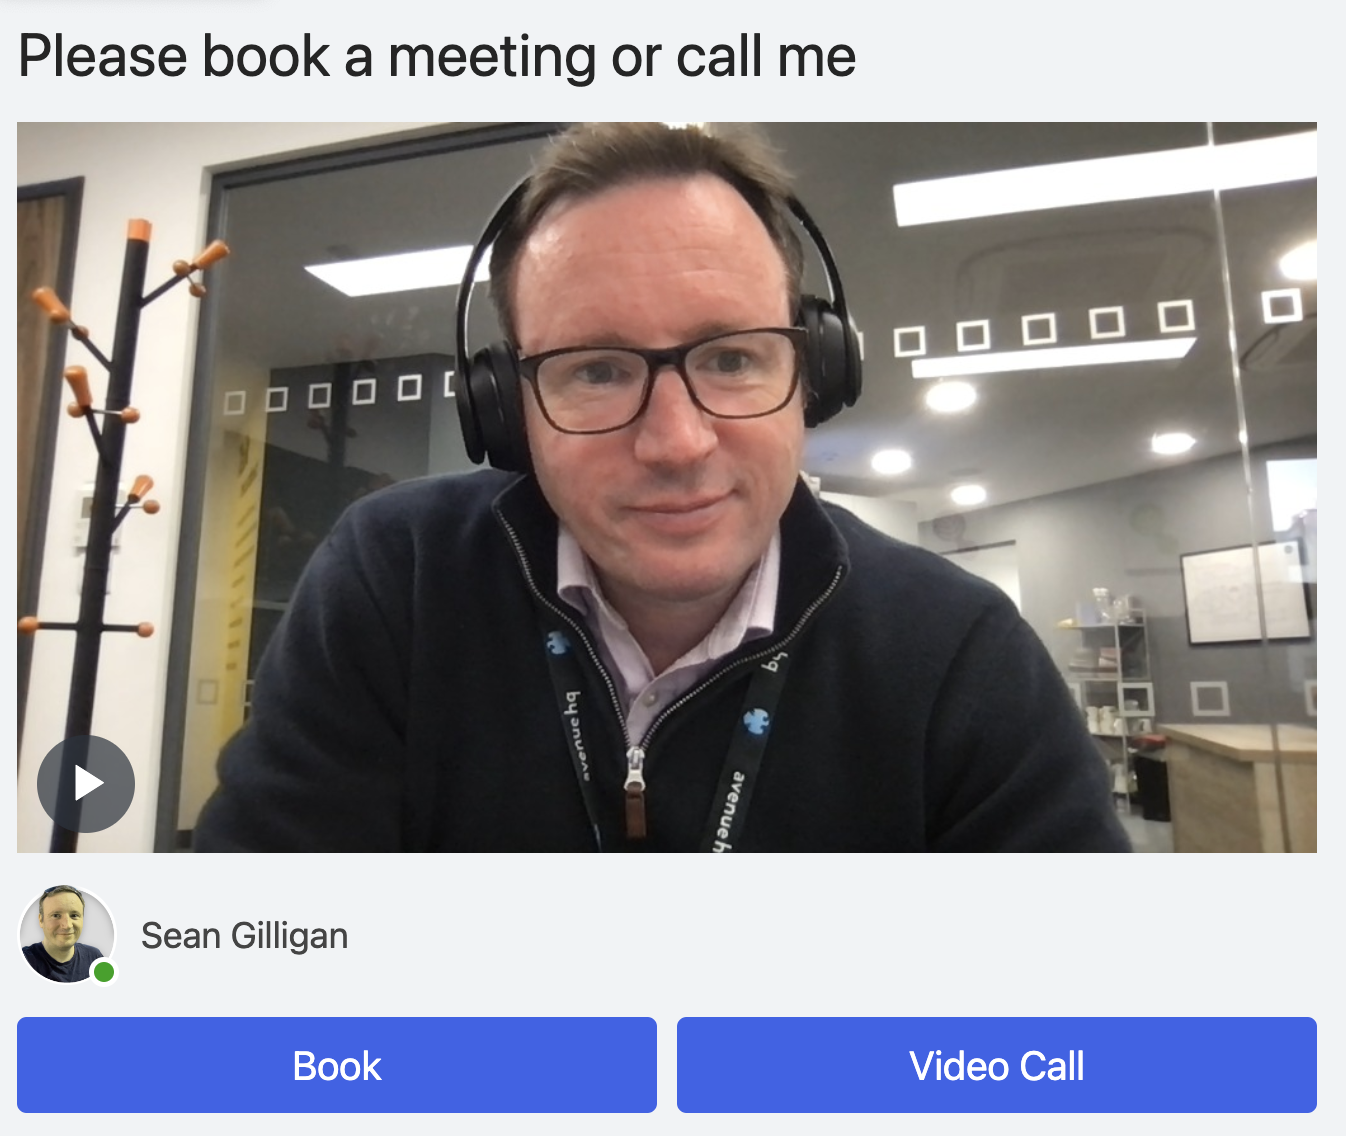 Async Video with Call Back Button and Book Meeting Option